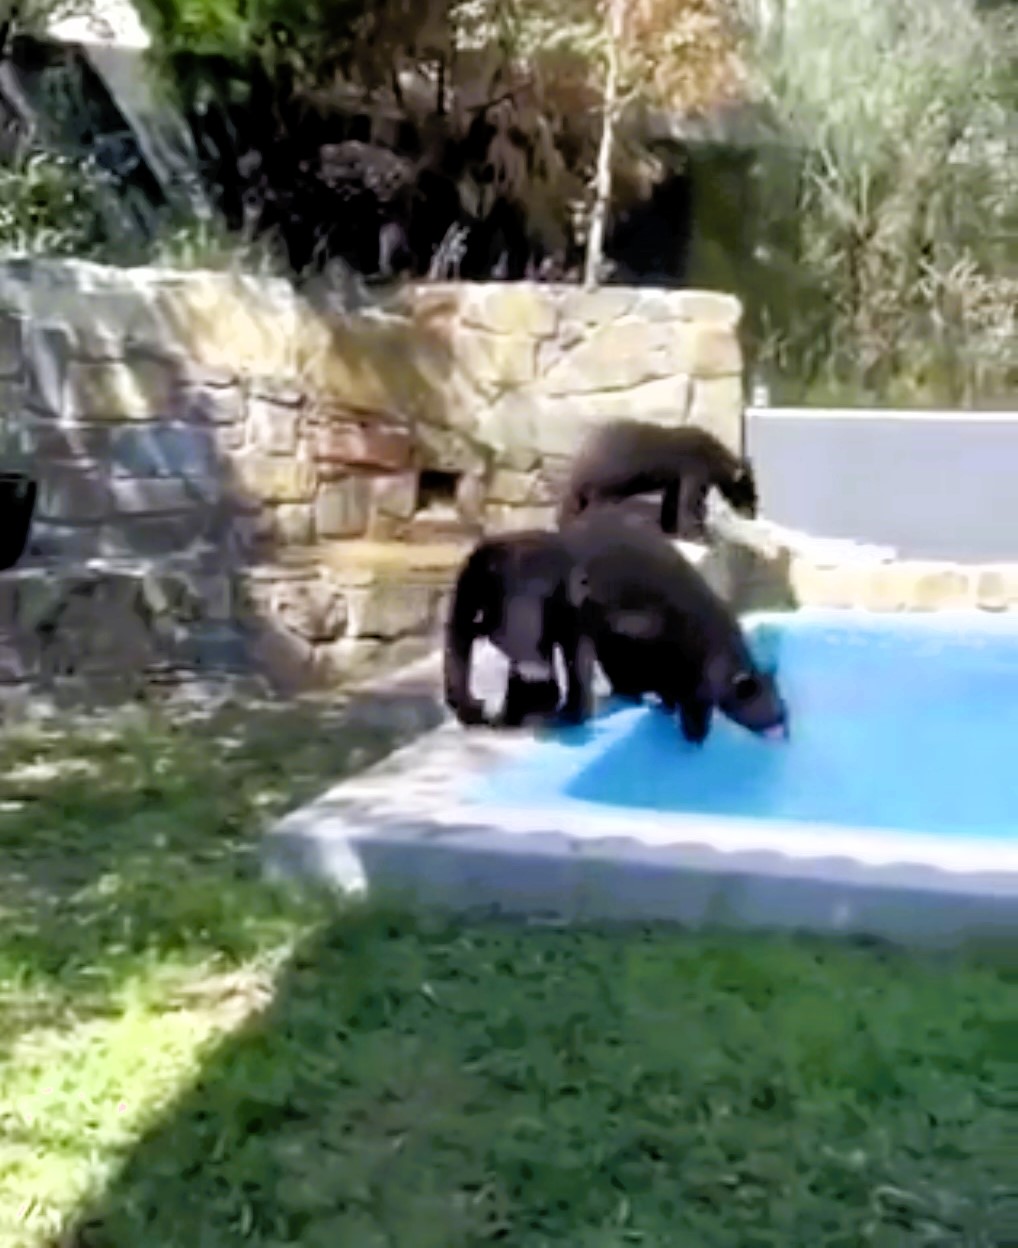 Witness the astonishing moment a family of bears takes a refreshing dip in a swimming pool, cooling off from the heat in San Pedro Garza García, Mexico.